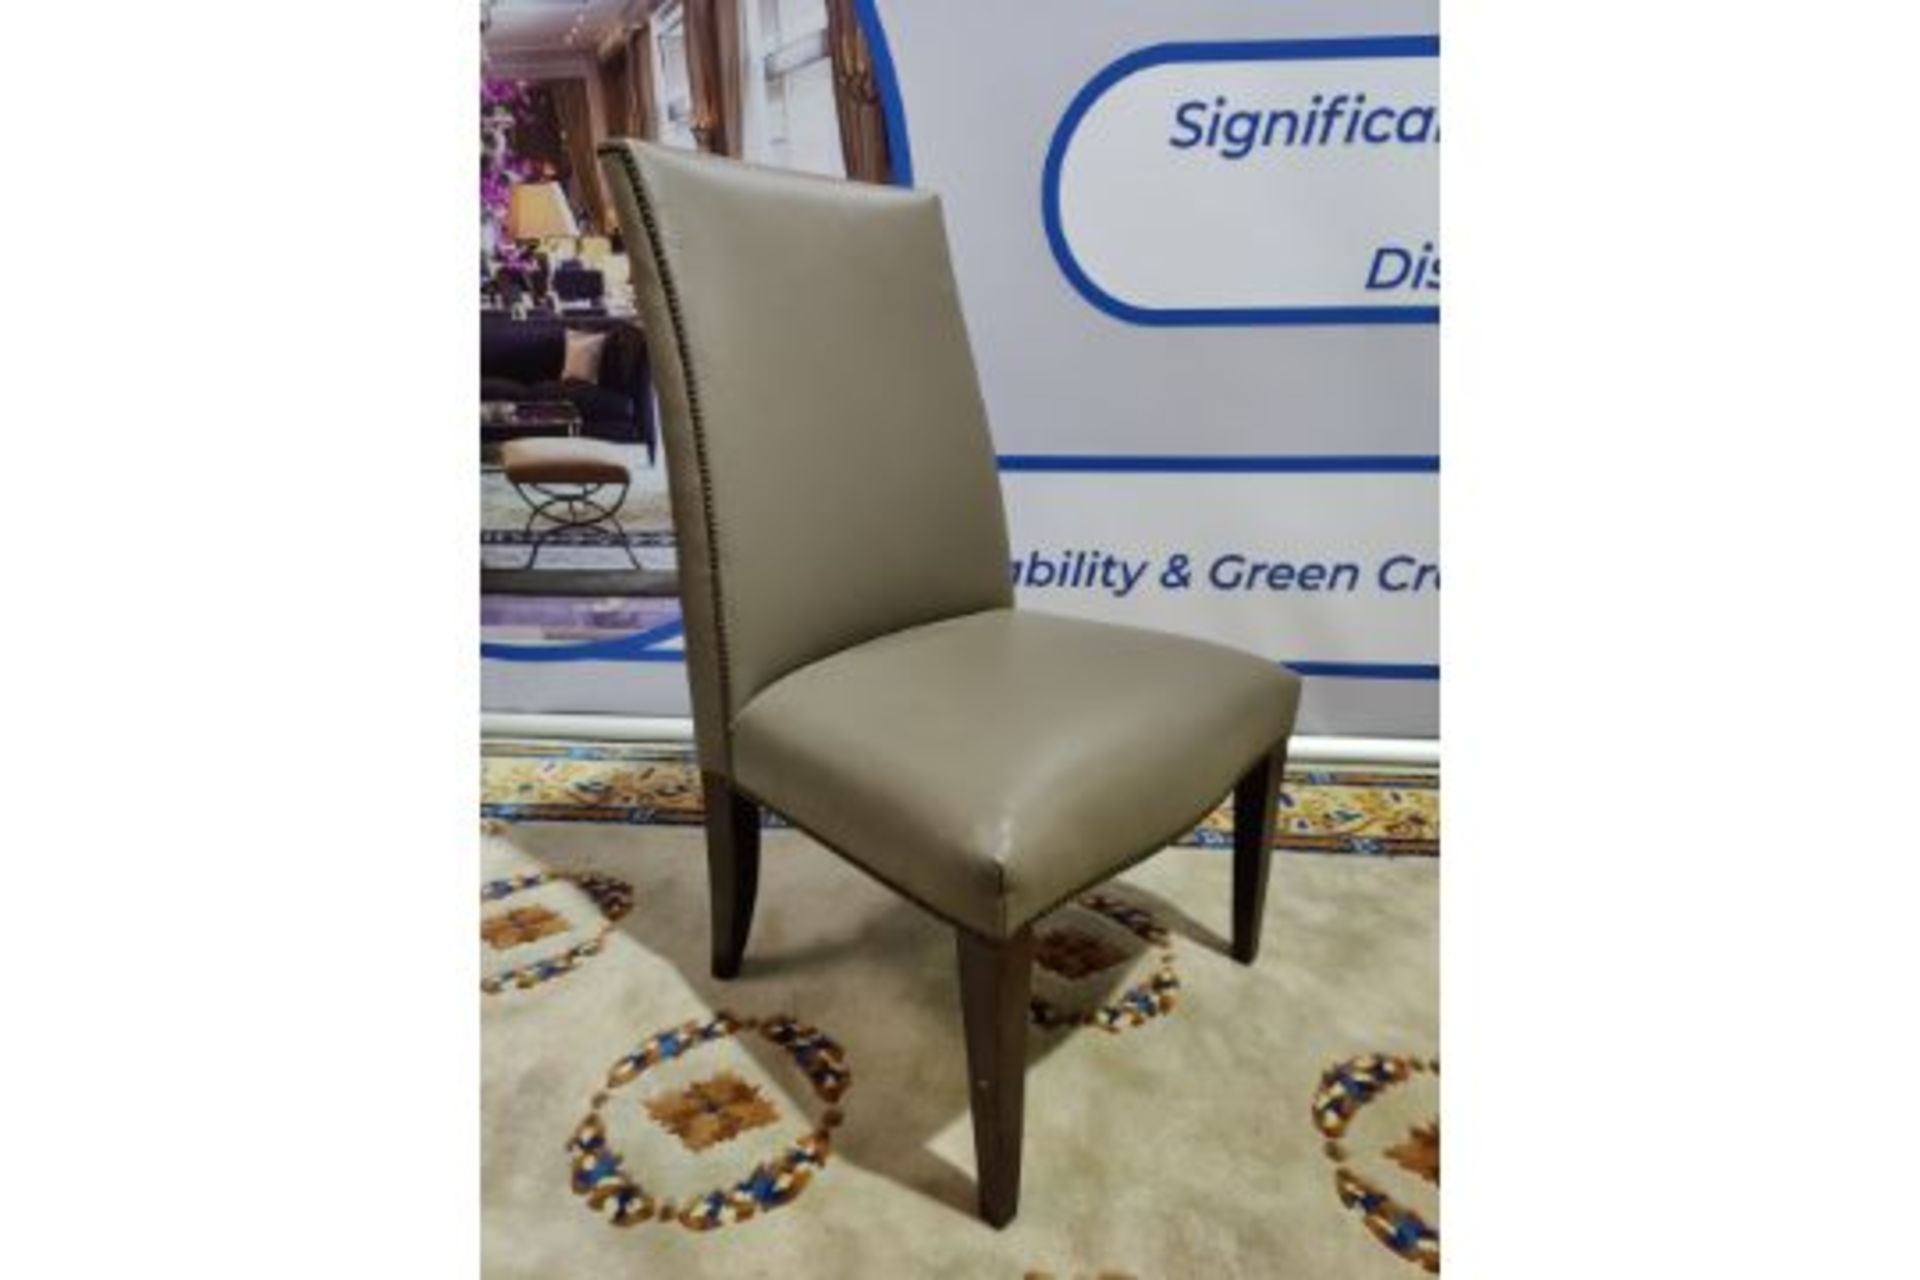 Leather High Back Chair With Stud Finish Detail Stained Wooden Legs 55 x 46 x 98cm - Bild 2 aus 2